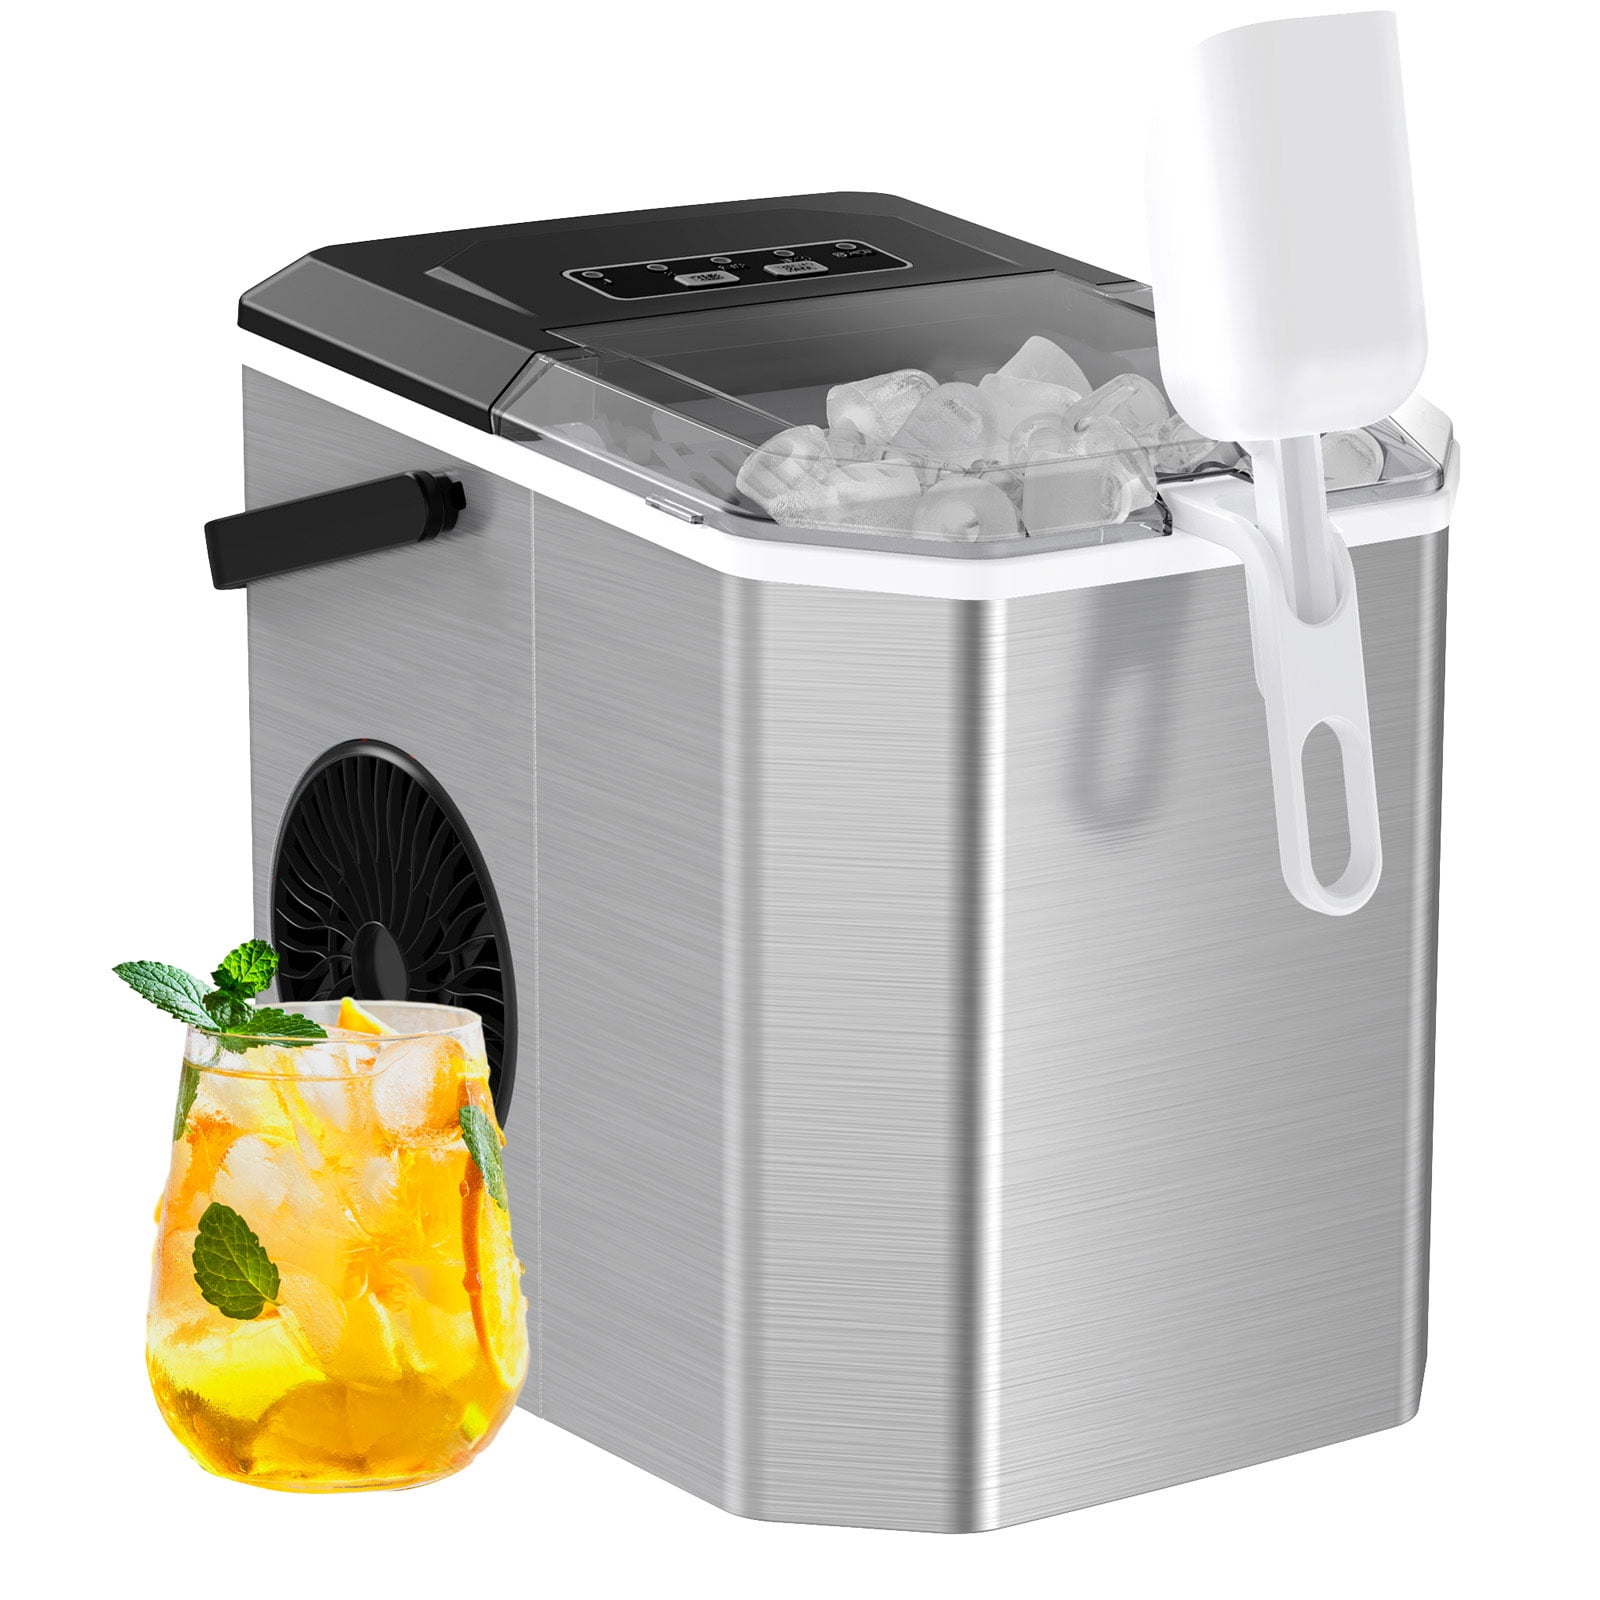 AGLUCKY Countertop Ice Maker Machine, Portable Ice Makers Countertop, Make  26 lbs ice in 24 hrs,Ice Cube Ready in 6-8 Mins with Ice Scoop and Basket  (Black)